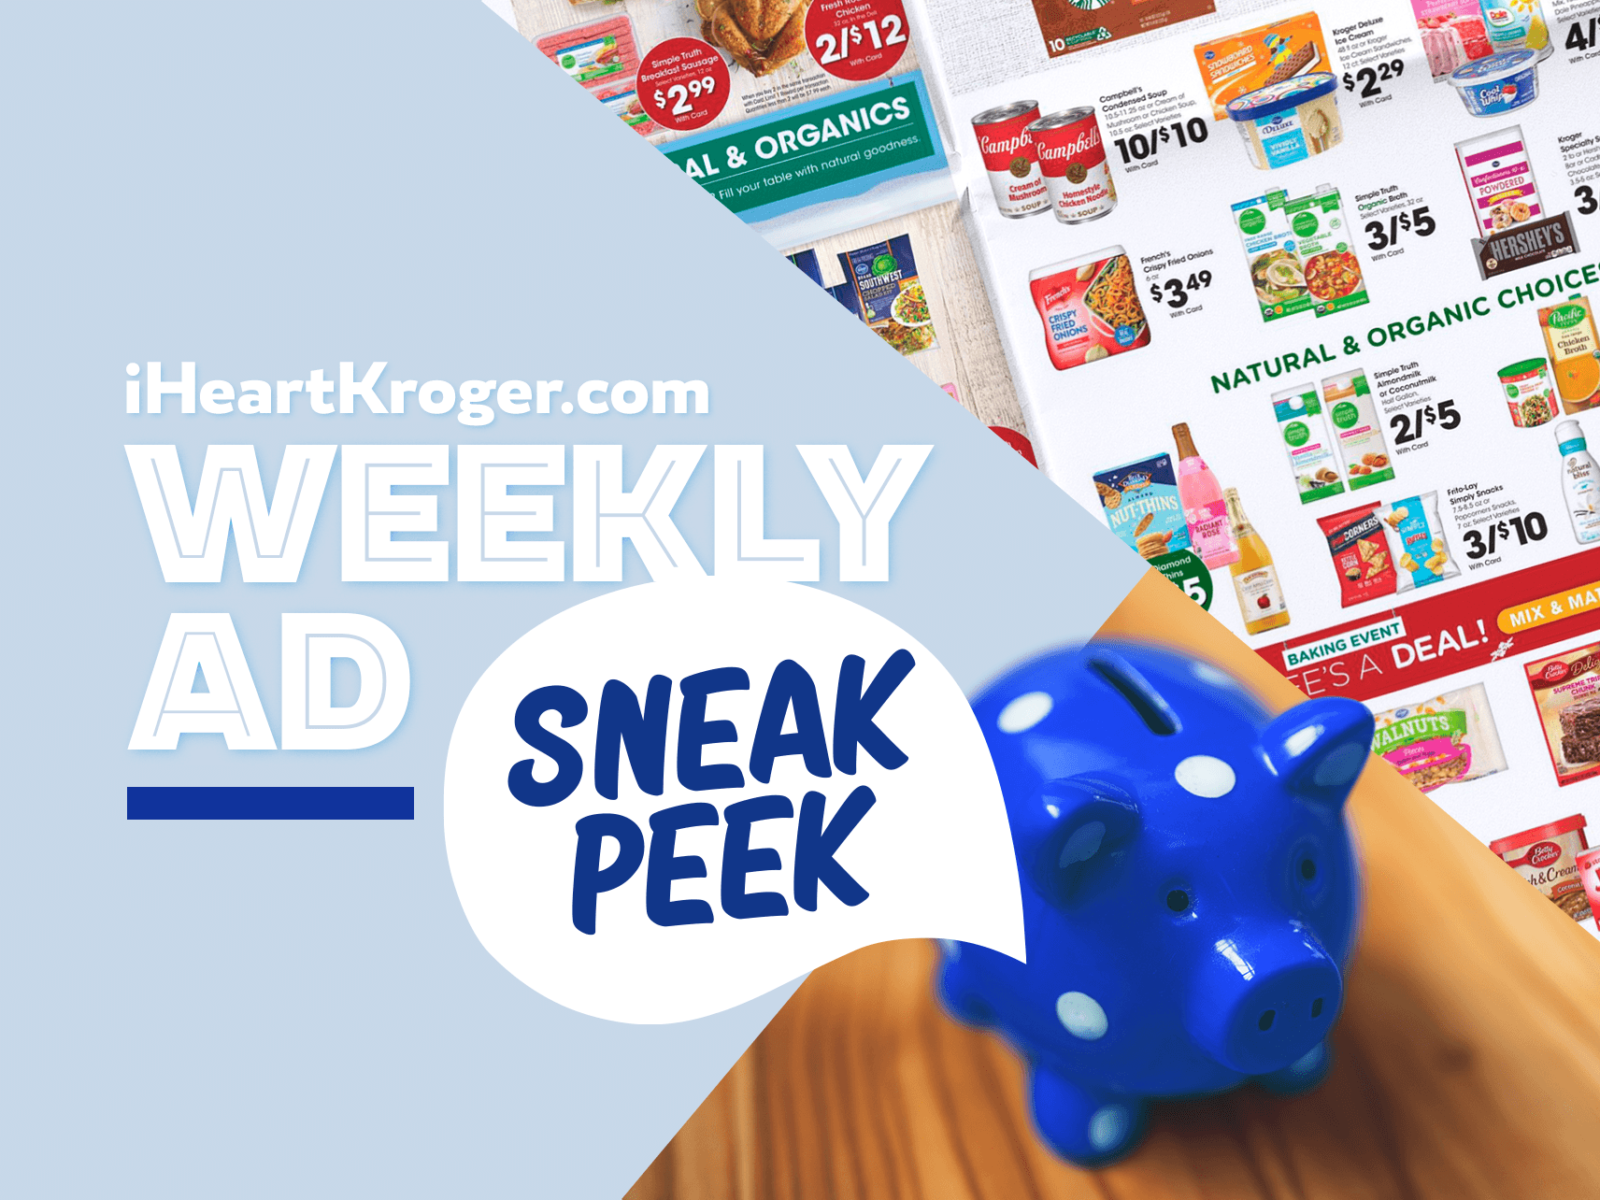 Kroger Ad & Coupons Week Of 12/7 to 12/13 – Mega Sale Continues